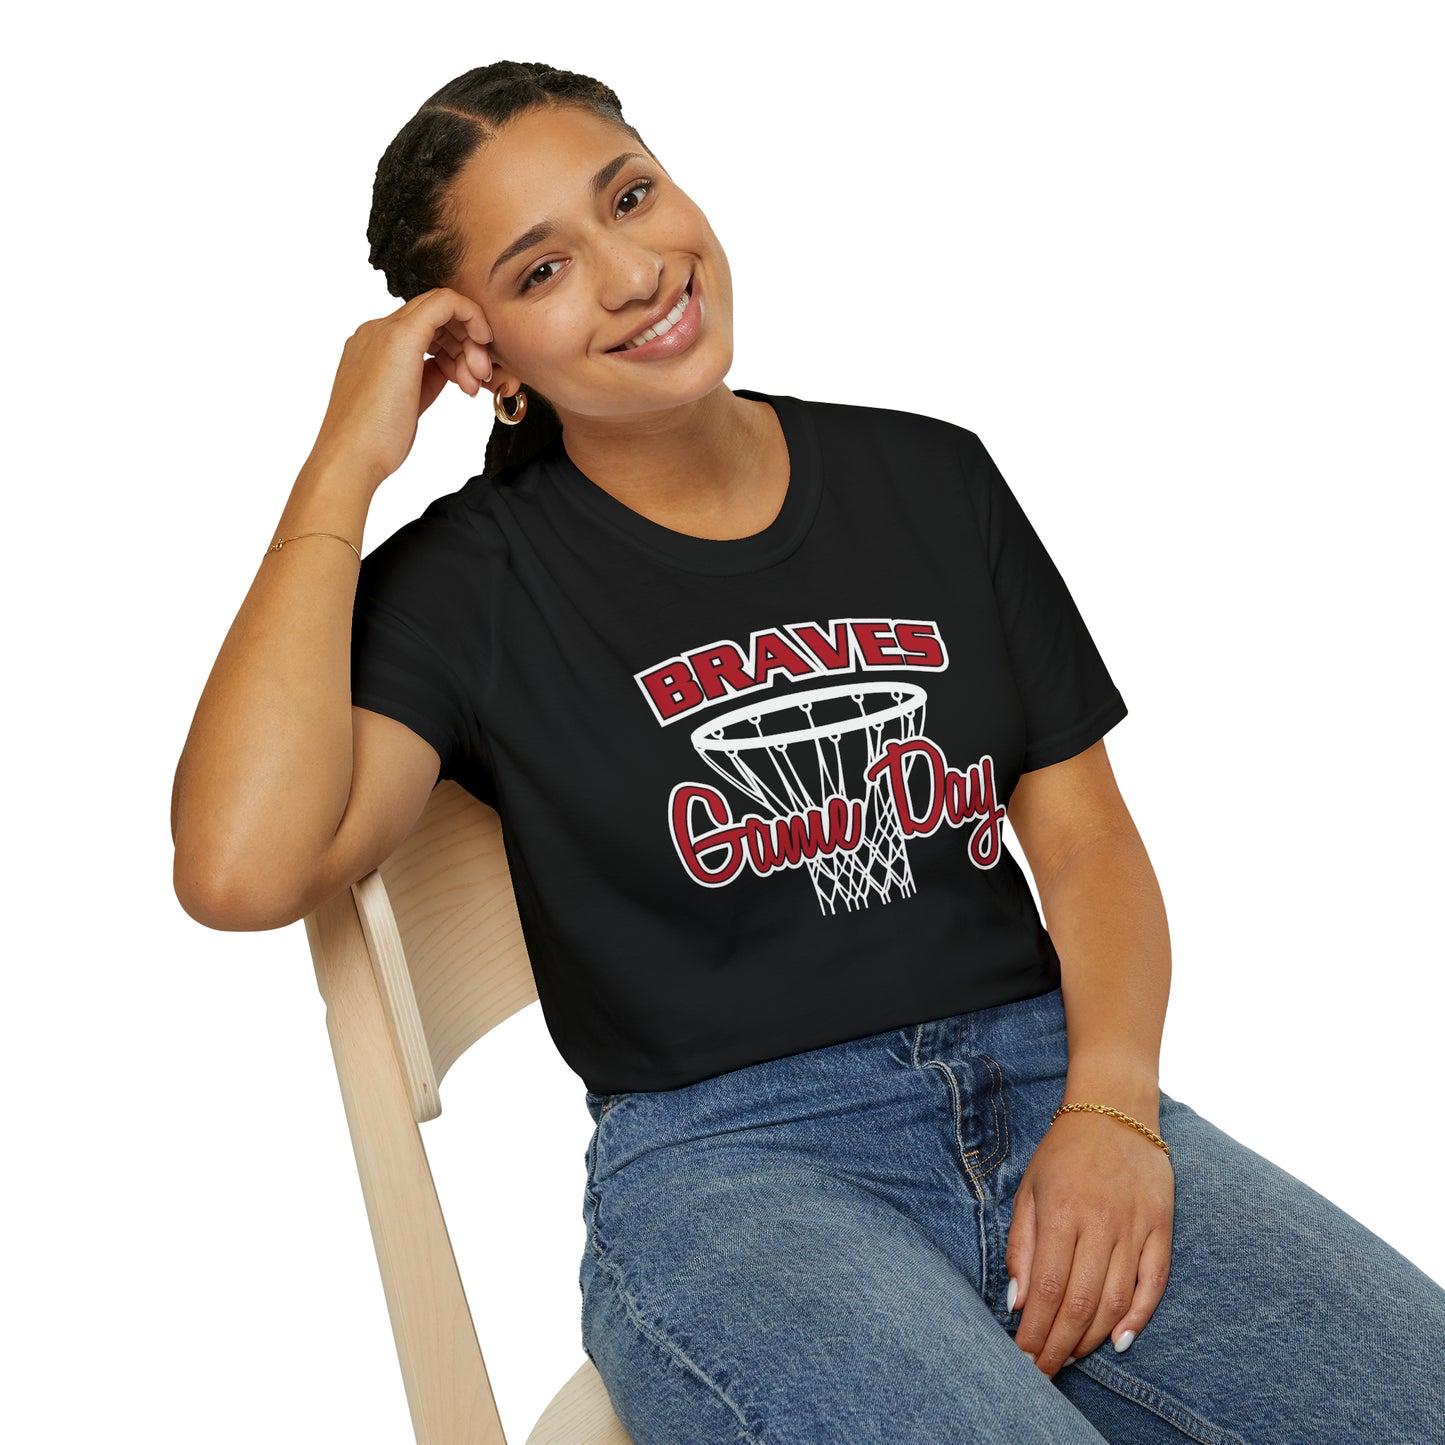 Braves Basketball Game Day Unisex Softstyle T-Shirt